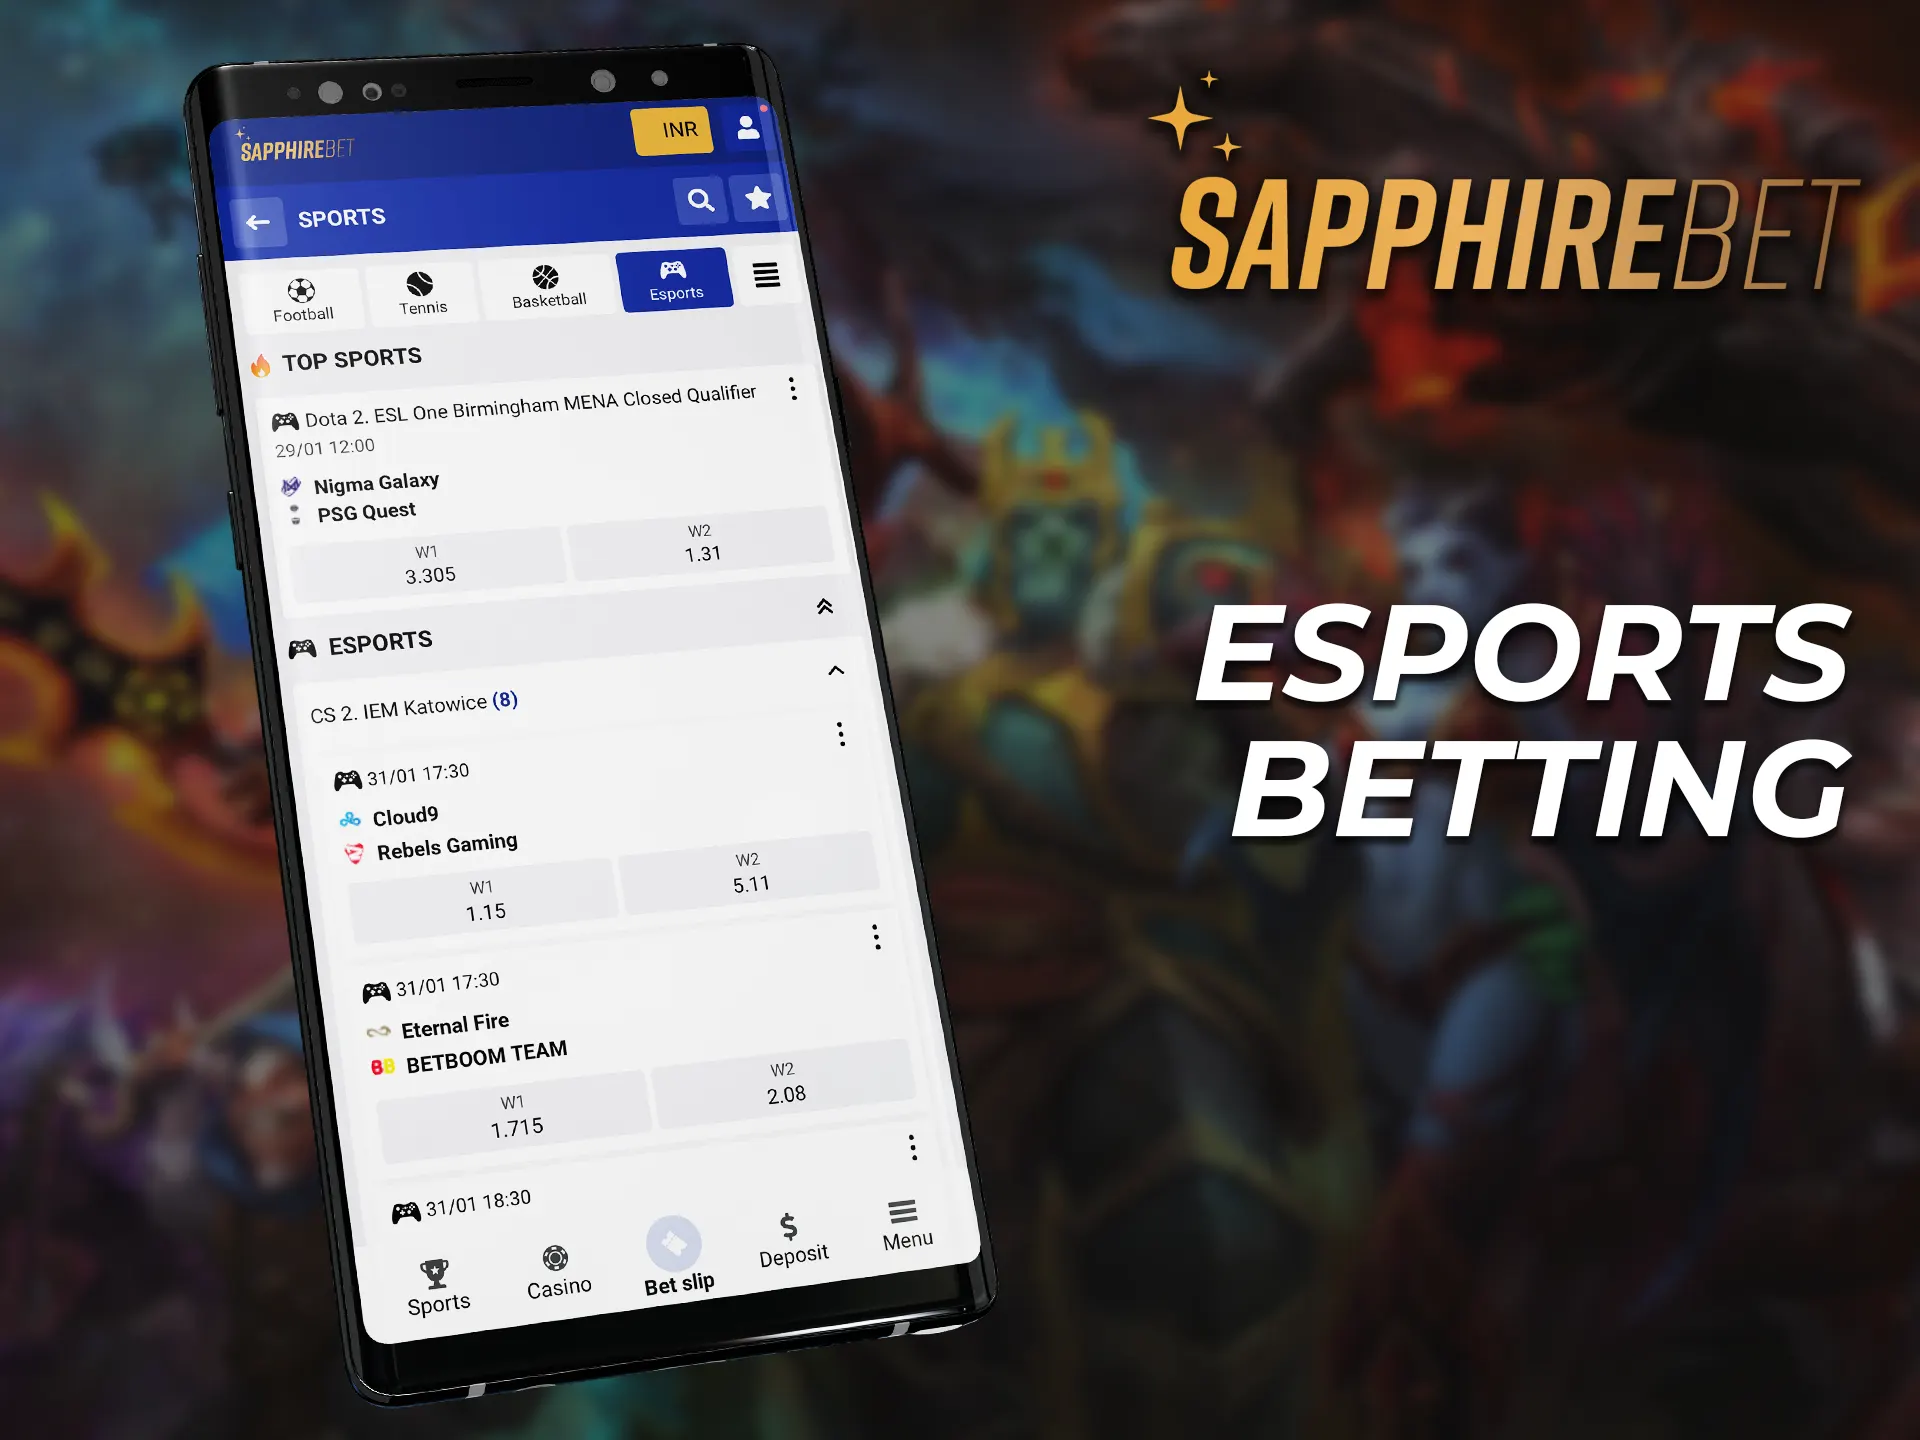 Betting on ESports disciplines is already available on the SapphireBet app.